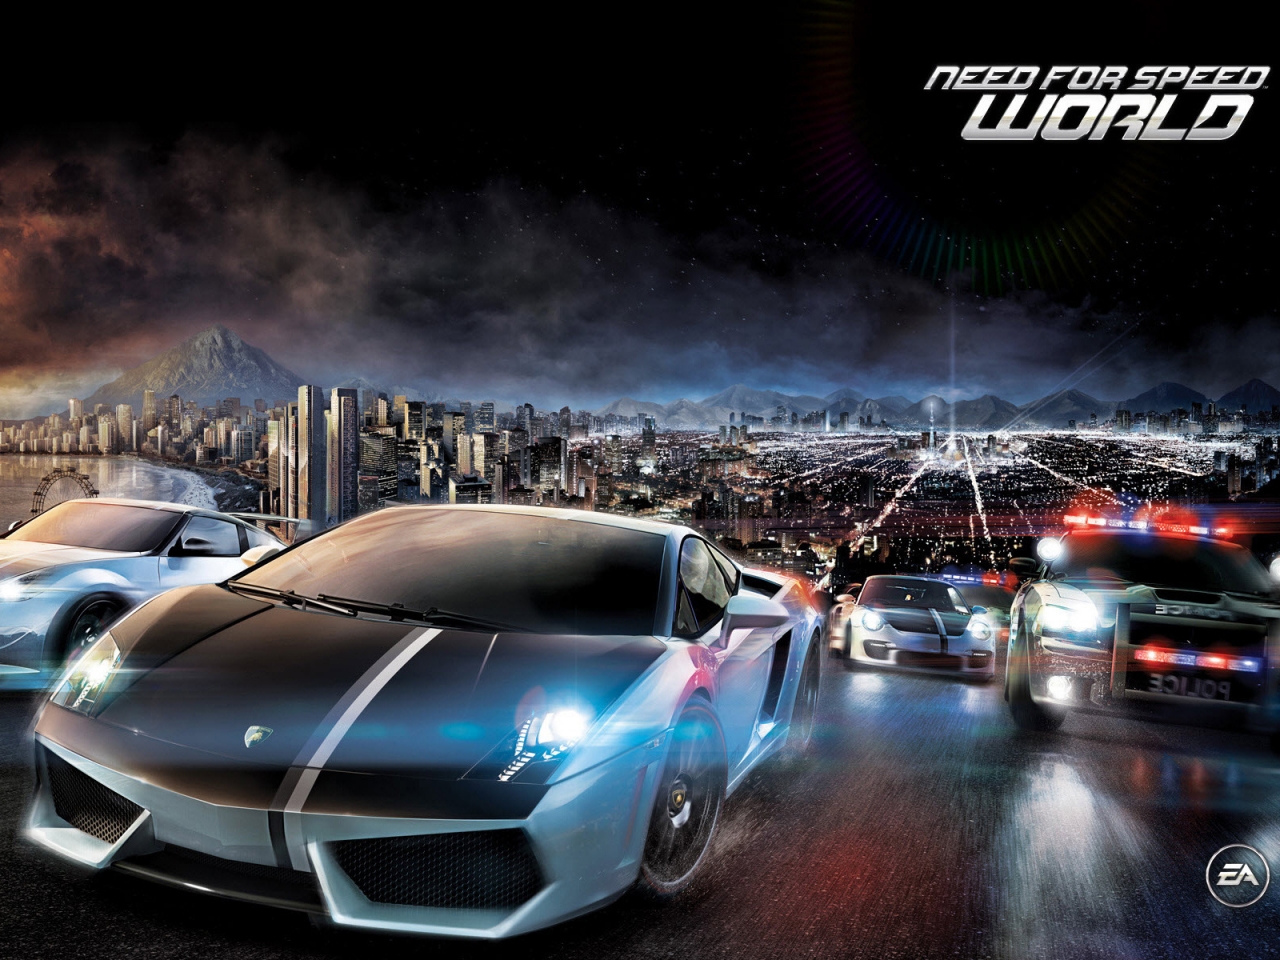 Need for Speed World for 1280 x 960 resolution